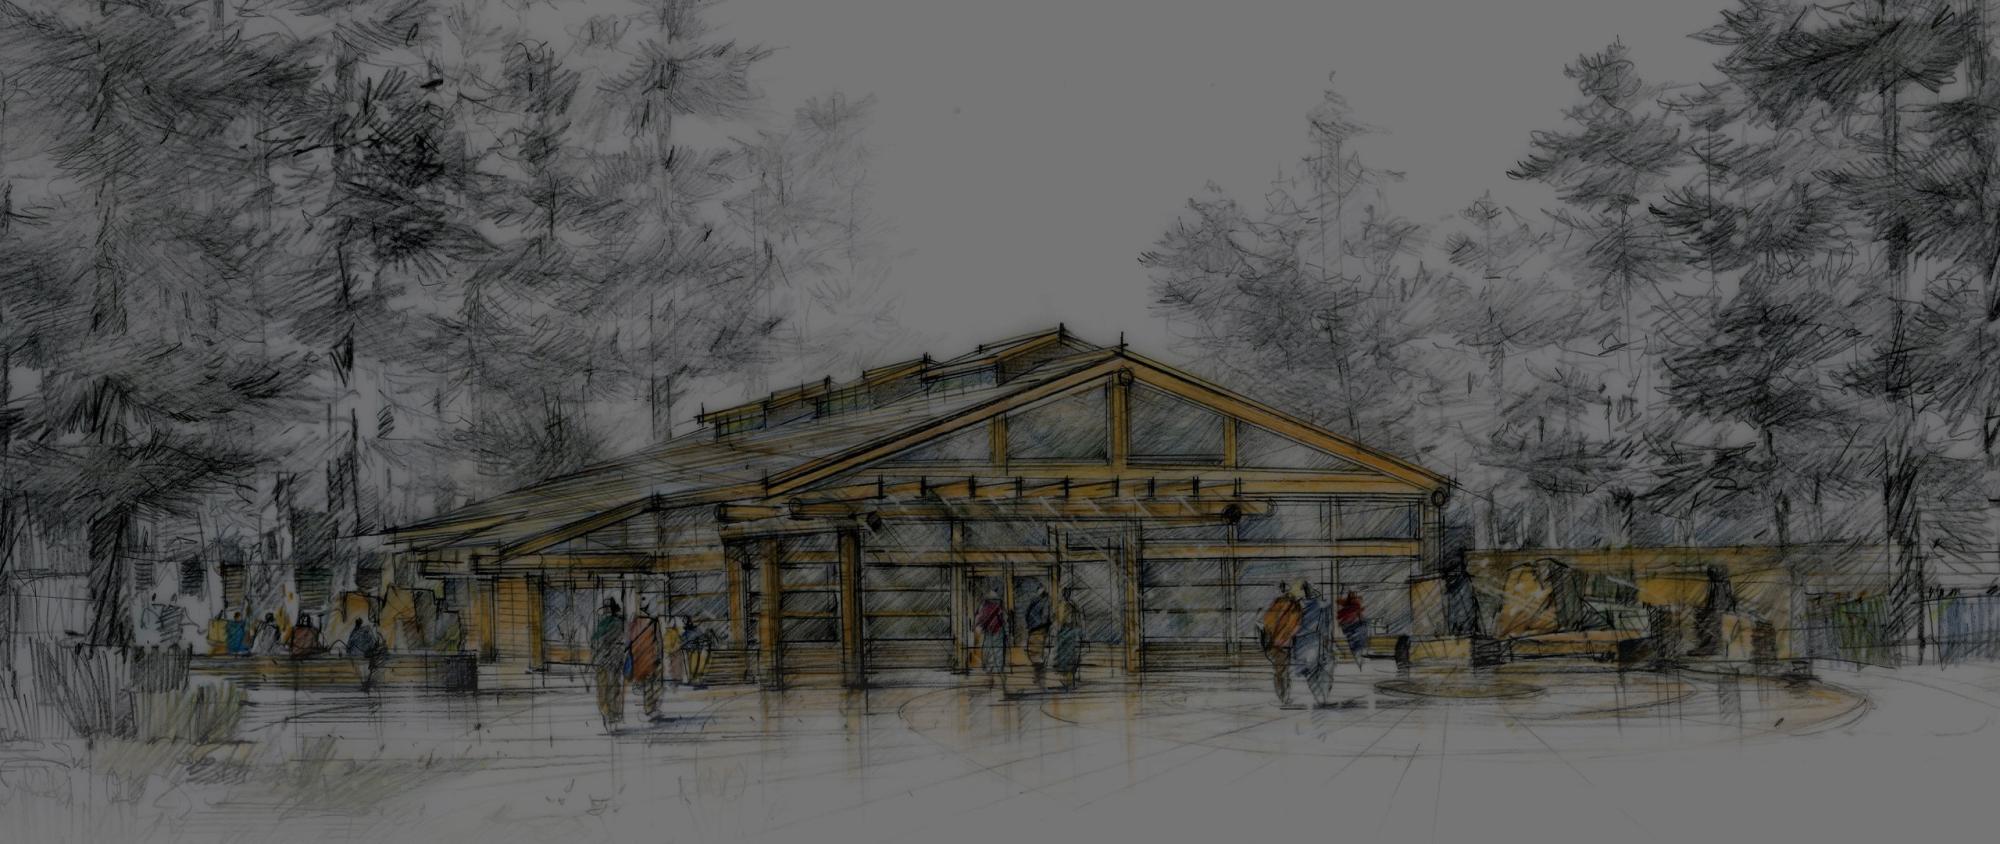 Architectural drawing by Jones & Jones Architects of the Longhouse